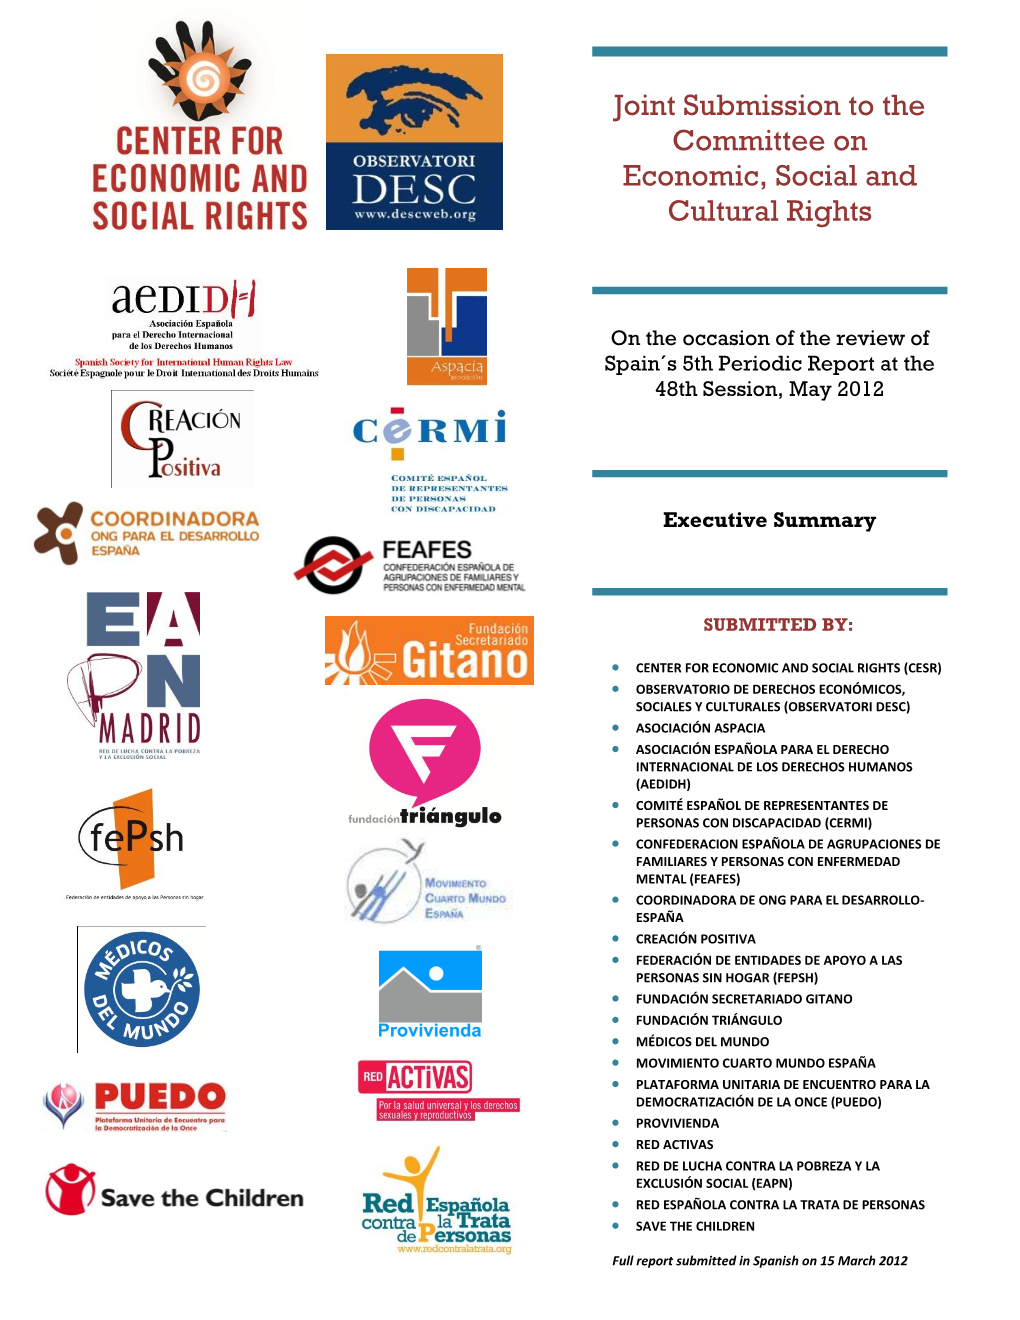 Joint Submission to the Committee on Economic, Social and Cultural Rights